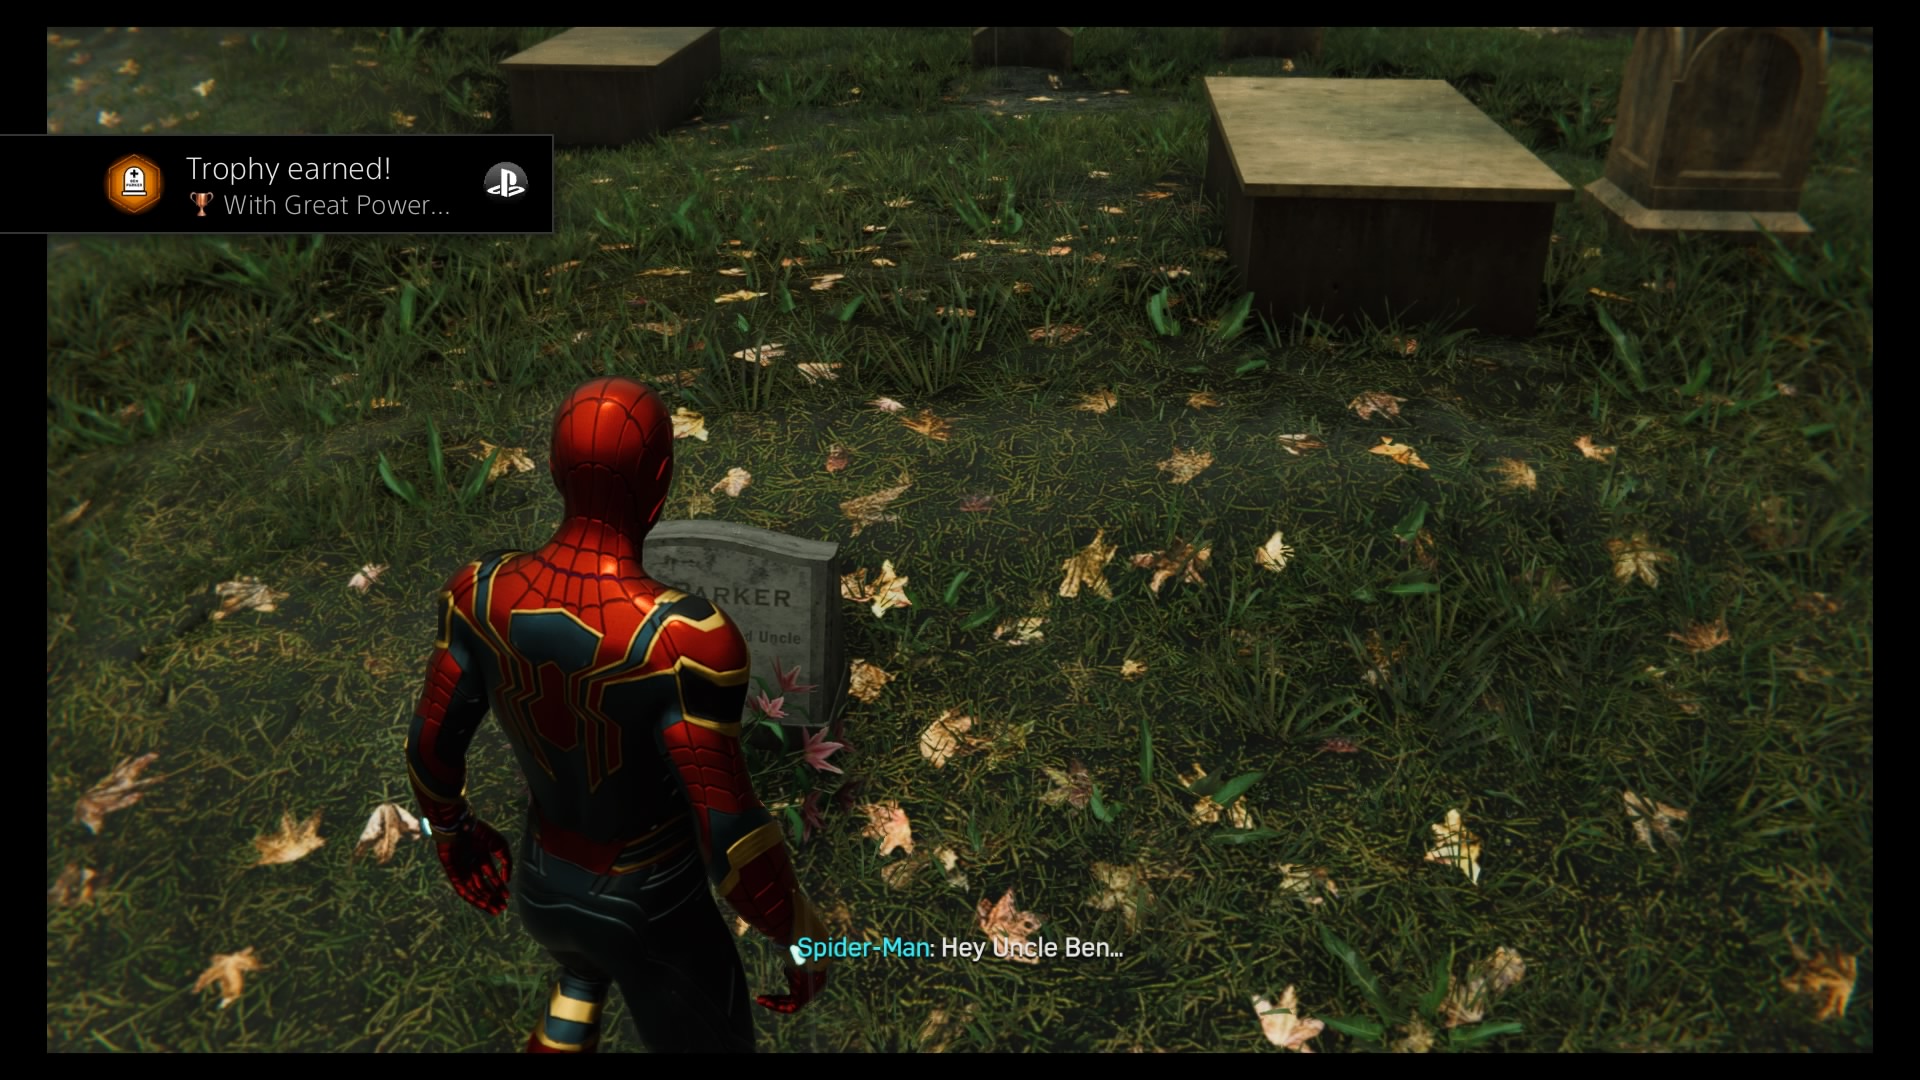 Duck on Twitter: "Marvel's Spider-Man With Great Power... (Bronze) Pay respects at Ben Parker's #PS4share https://t.co/YnsoHjF3Wc" / Twitter